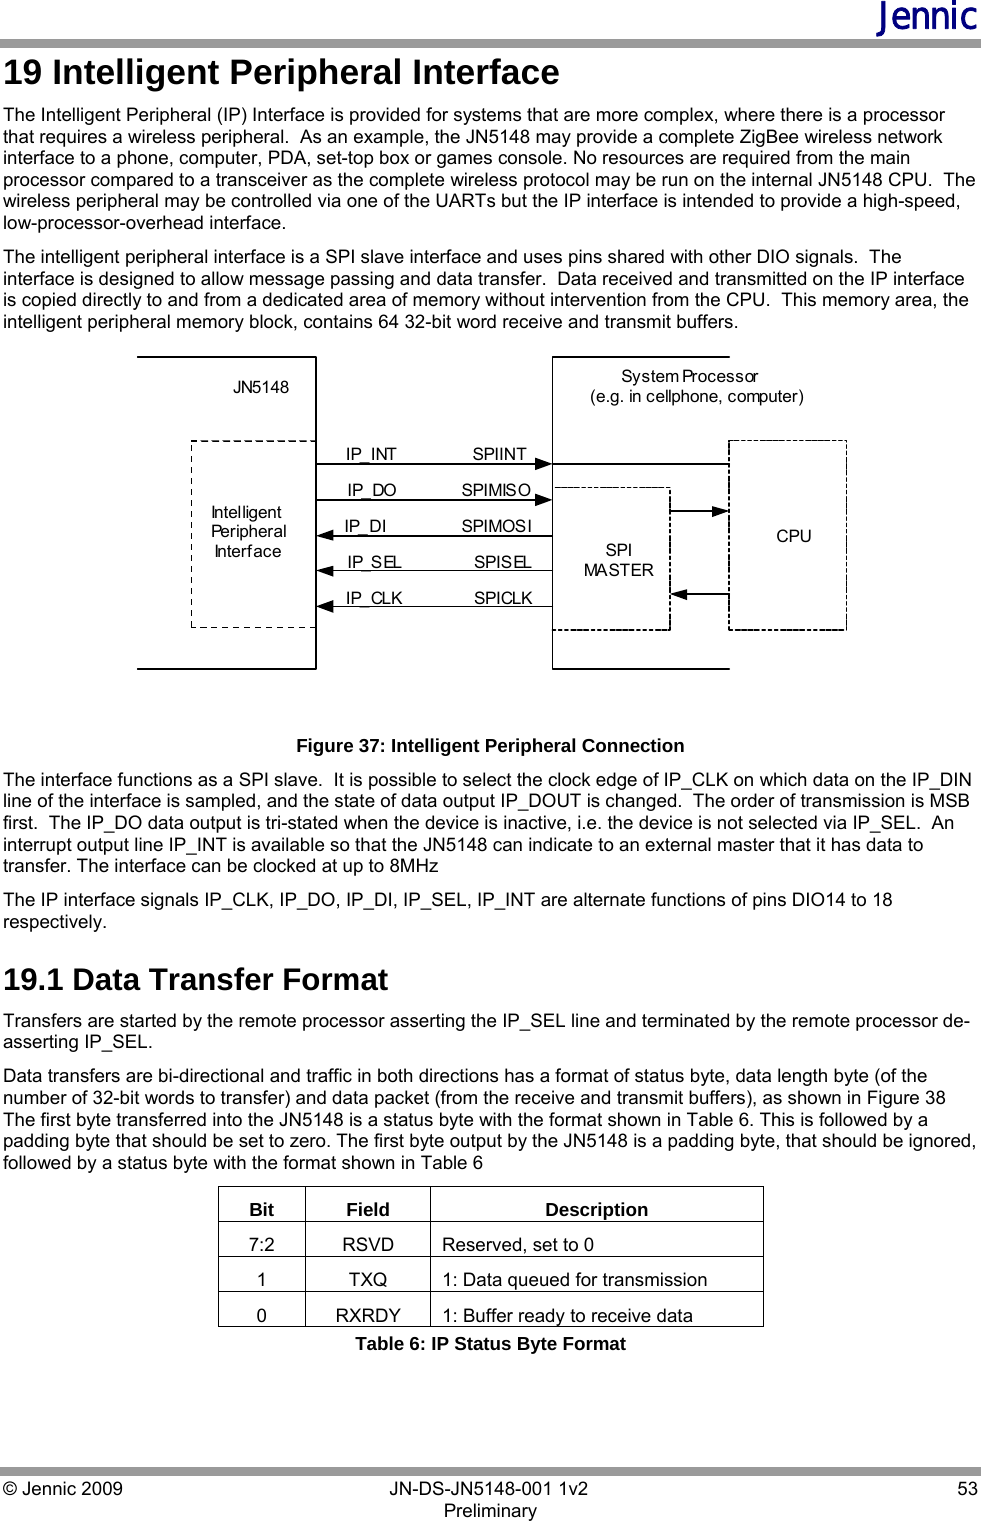 Jennic © Jennic 2009        JN-DS-JN5148-001 1v2  53 Preliminary  19 Intelligent Peripheral Interface The Intelligent Peripheral (IP) Interface is provided for systems that are more complex, where there is a processor that requires a wireless peripheral.  As an example, the JN5148 may provide a complete ZigBee wireless network interface to a phone, computer, PDA, set-top box or games console. No resources are required from the main processor compared to a transceiver as the complete wireless protocol may be run on the internal JN5148 CPU.  The wireless peripheral may be controlled via one of the UARTs but the IP interface is intended to provide a high-speed, low-processor-overhead interface. The intelligent peripheral interface is a SPI slave interface and uses pins shared with other DIO signals.  The interface is designed to allow message passing and data transfer.  Data received and transmitted on the IP interface is copied directly to and from a dedicated area of memory without intervention from the CPU.  This memory area, the intelligent peripheral memory block, contains 64 32-bit word receive and transmit buffers. JN5148 Intelligent Peripheral Int er f a c e SPI MASTER System Processor (e.g. in cellphone, computer) CPU IP_DO SPIMISO IP_INT SPIINT IP_DI SPIMOSI SPISEL IP_SEL IP_CLK SPICLK  Figure 37: Intelligent Peripheral Connection The interface functions as a SPI slave.  It is possible to select the clock edge of IP_CLK on which data on the IP_DIN line of the interface is sampled, and the state of data output IP_DOUT is changed.  The order of transmission is MSB first.  The IP_DO data output is tri-stated when the device is inactive, i.e. the device is not selected via IP_SEL.  An interrupt output line IP_INT is available so that the JN5148 can indicate to an external master that it has data to transfer. The interface can be clocked at up to 8MHz The IP interface signals IP_CLK, IP_DO, IP_DI, IP_SEL, IP_INT are alternate functions of pins DIO14 to 18 respectively. 19.1 Data Transfer Format Transfers are started by the remote processor asserting the IP_SEL line and terminated by the remote processor de-asserting IP_SEL. Data transfers are bi-directional and traffic in both directions has a format of status byte, data length byte (of the number of 32-bit words to transfer) and data packet (from the receive and transmit buffers), as shown in Figure 38 The first byte transferred into the JN5148 is a status byte with the format shown in Table 6. This is followed by a padding byte that should be set to zero. The first byte output by the JN5148 is a padding byte, that should be ignored, followed by a status byte with the format shown in Table 6 Bit Field  Description 7:2  RSVD  Reserved, set to 0 1  TXQ  1: Data queued for transmission 0  RXRDY  1: Buffer ready to receive data Table 6: IP Status Byte Format 